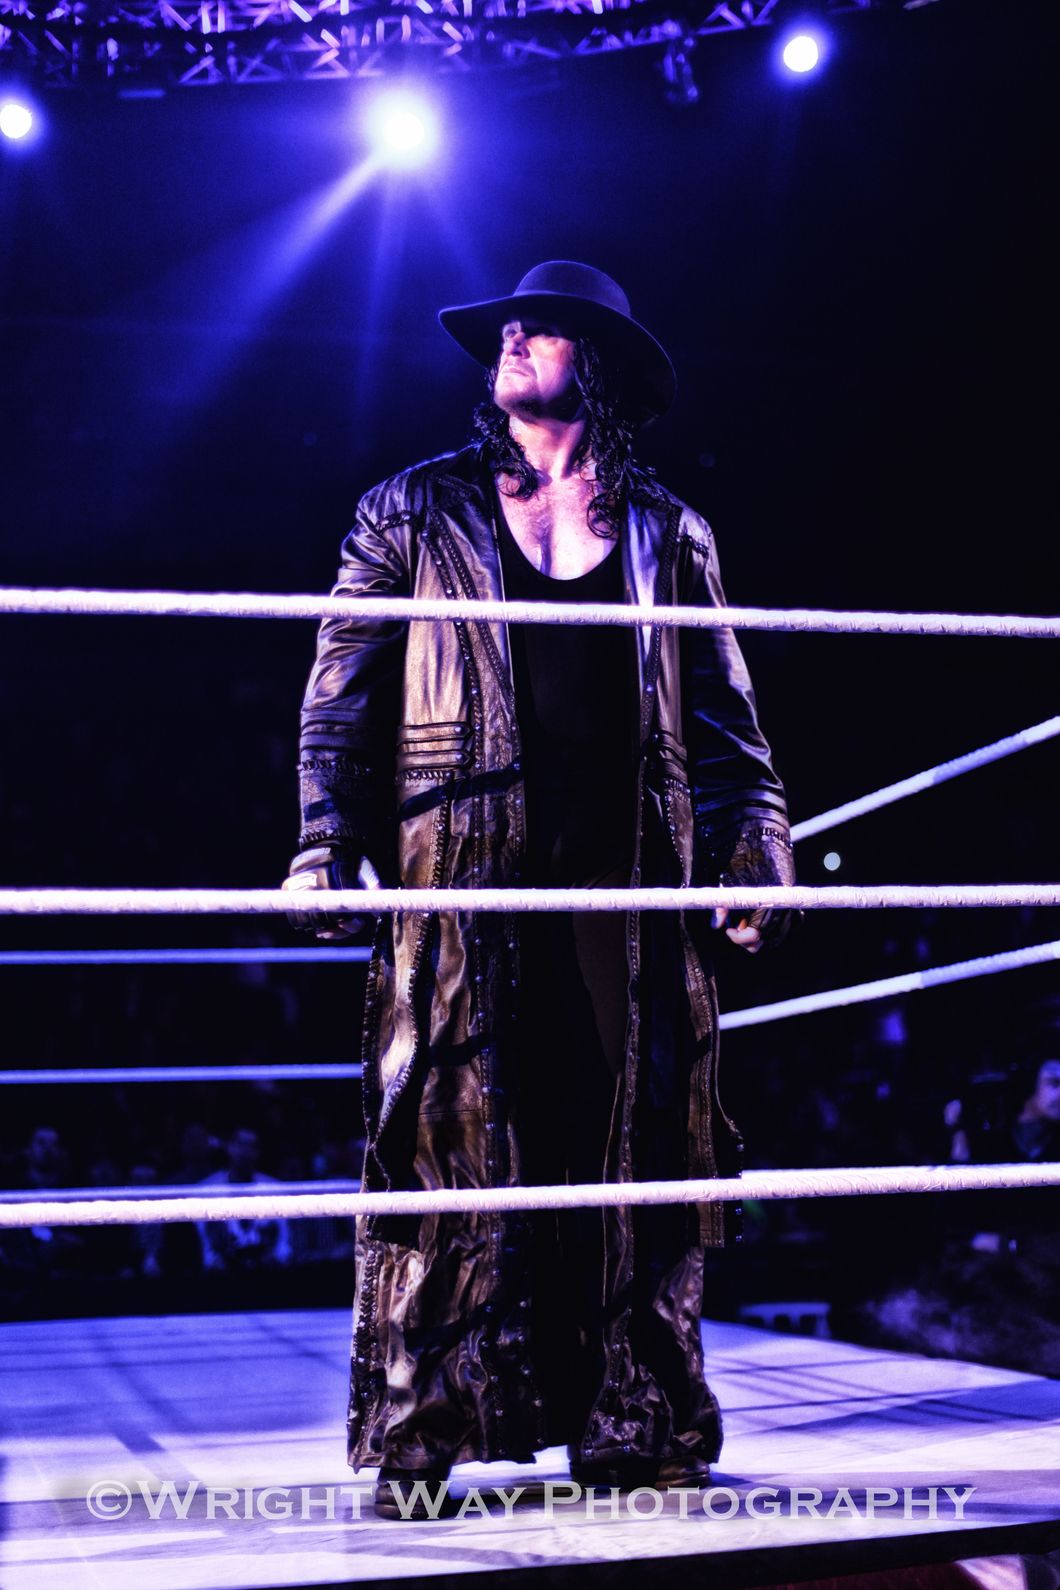 Undertaker vs AJ Styles At Wrestlemania 36 is Best For Business